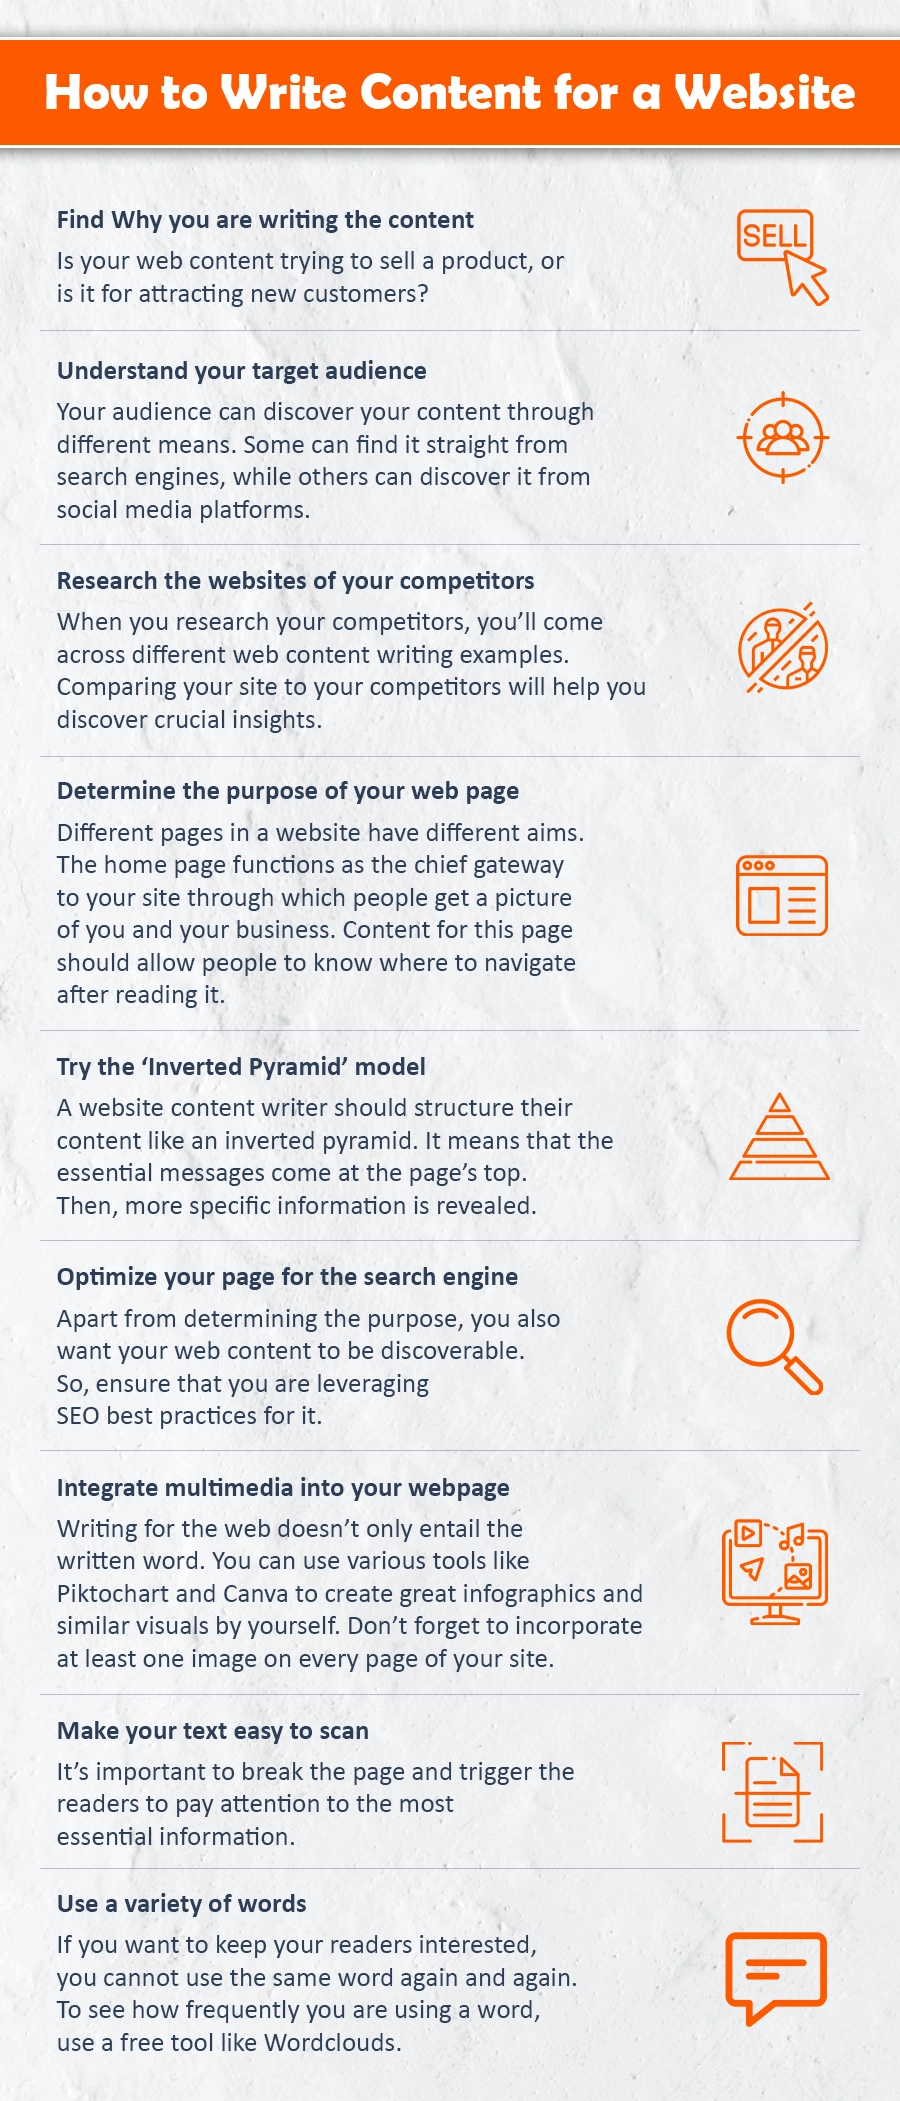 How to Write Content for a Website